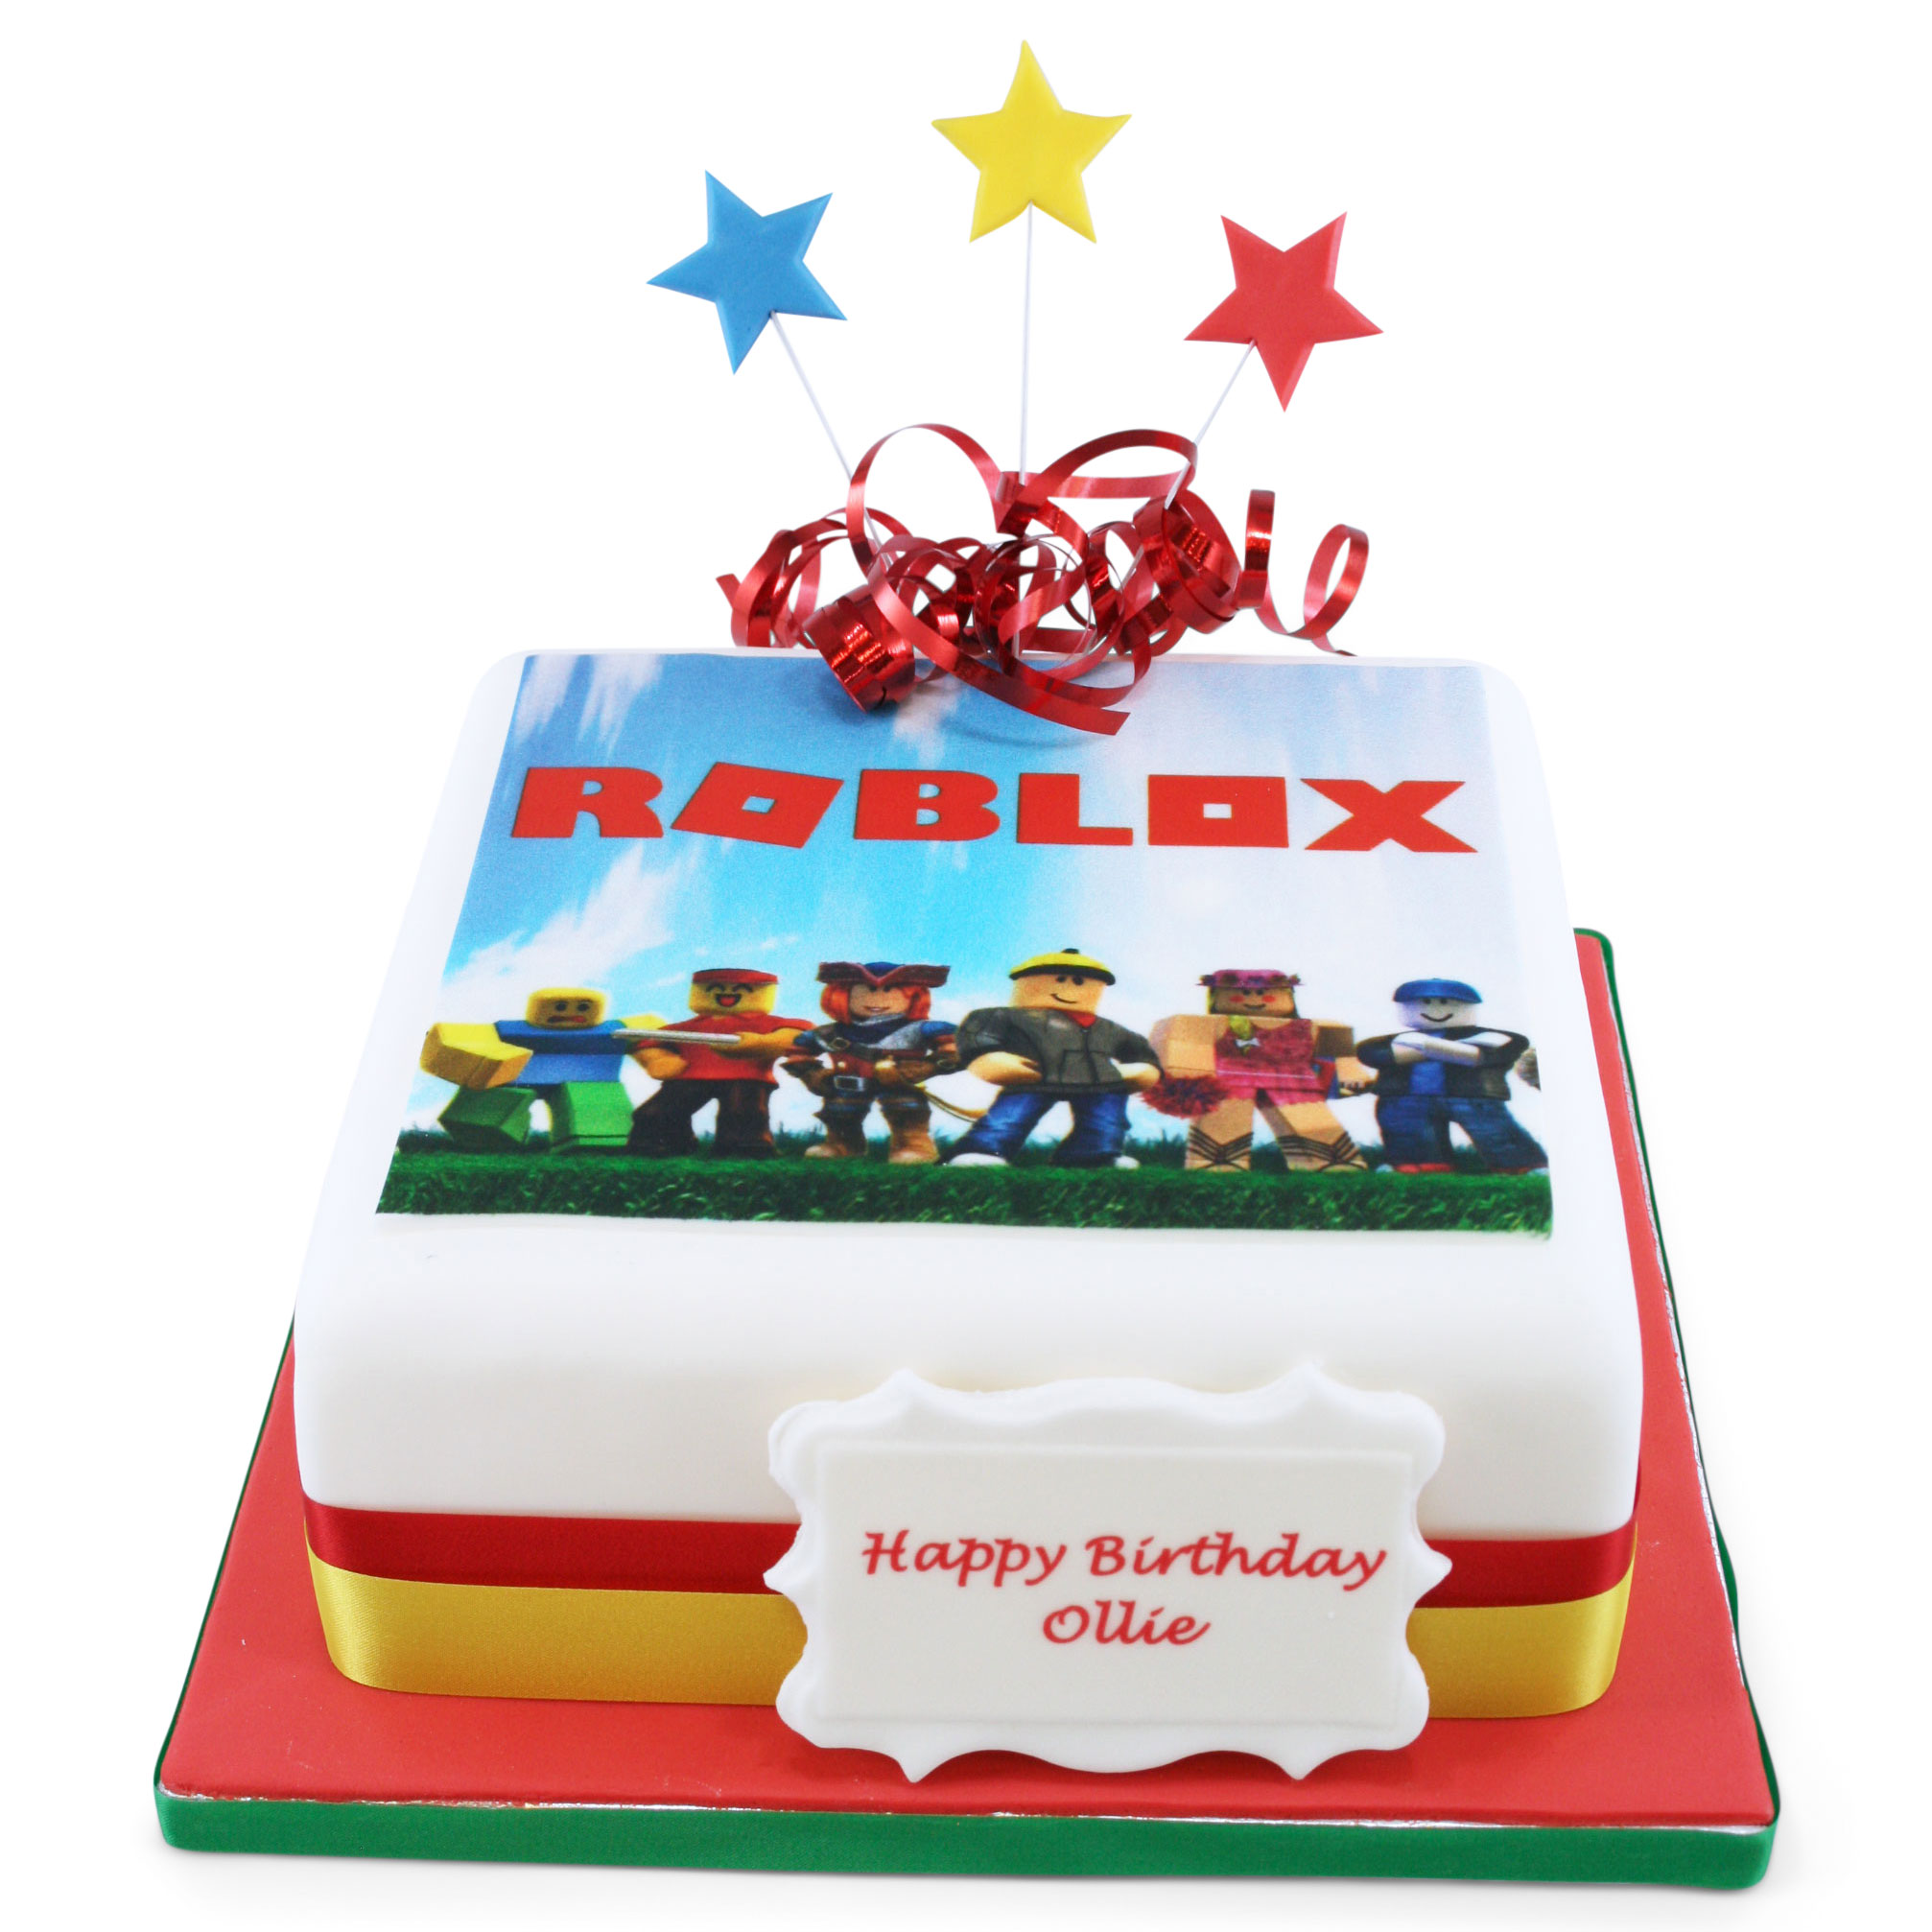 Roblox and Lego Cake